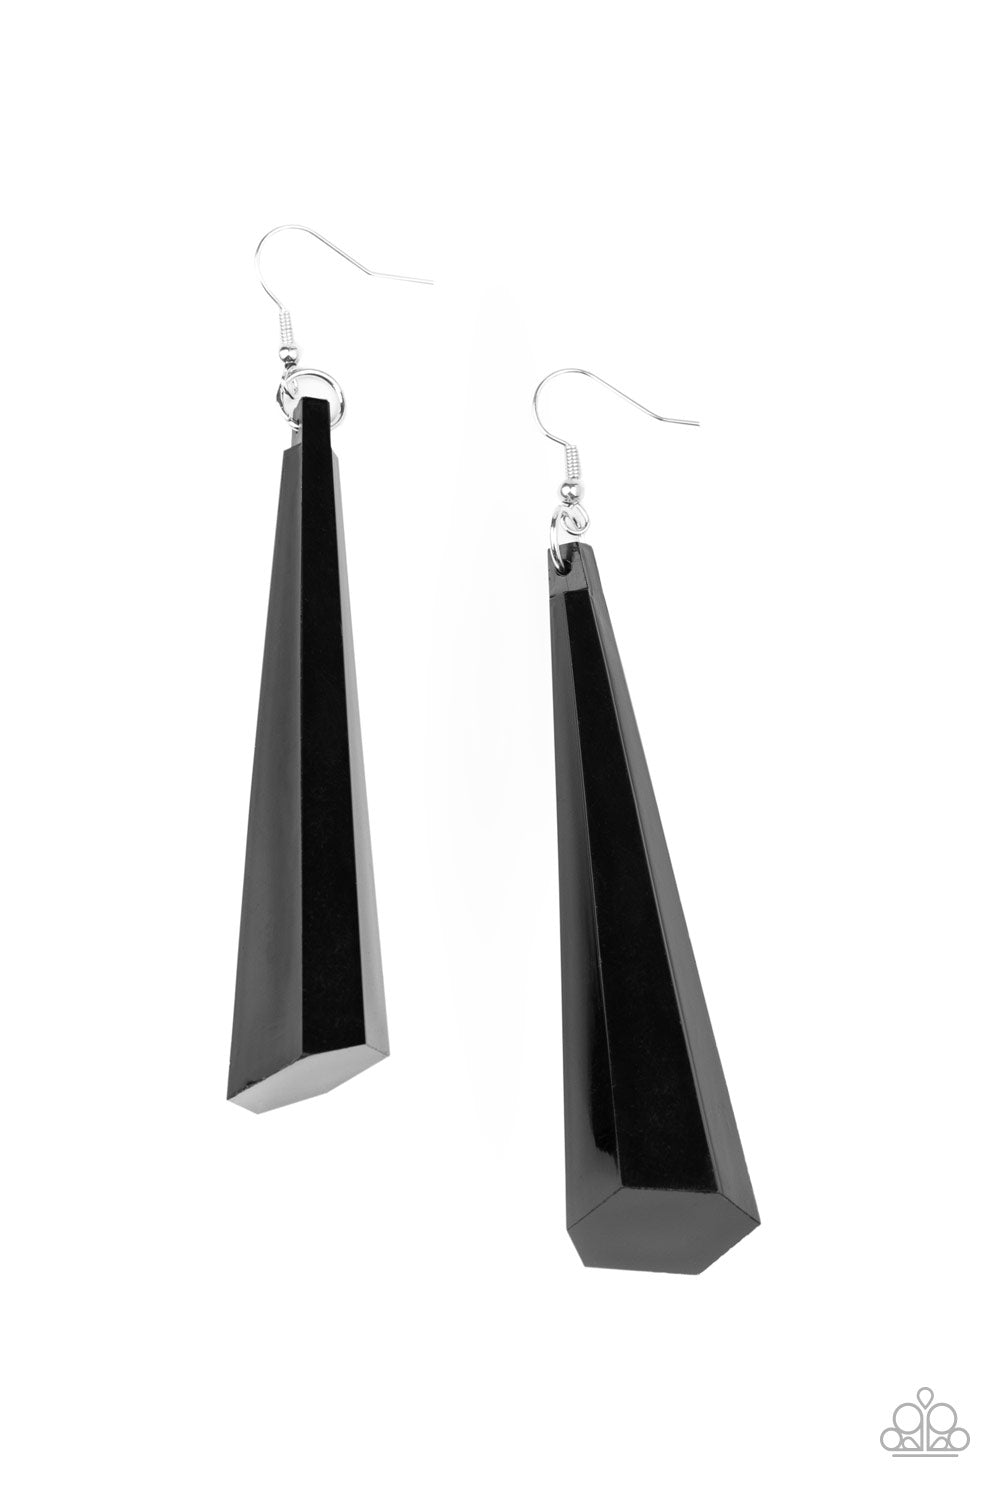 &lt;P&gt;Featuring an asymmetrical cone shape, a faceted elongated black crystal-like frame swings from the ear for a jaw-dropping look. Earring attaches to a standard fishhook fitting.&lt;/P&gt;  

&lt;P&gt; &lt;I&gt;  Sold as one pair of earrings. &lt;/I&gt;  &lt;/P&gt;


&lt;img src=\&quot;https://d9b54x484lq62.cloudfront.net/paparazzi/shopping/images/517_tag150x115_1.png\&quot; alt=\&quot;New Kit\&quot; align=\&quot;middle\&quot; height=\&quot;50\&quot; width=\&quot;50\&quot;/&gt;